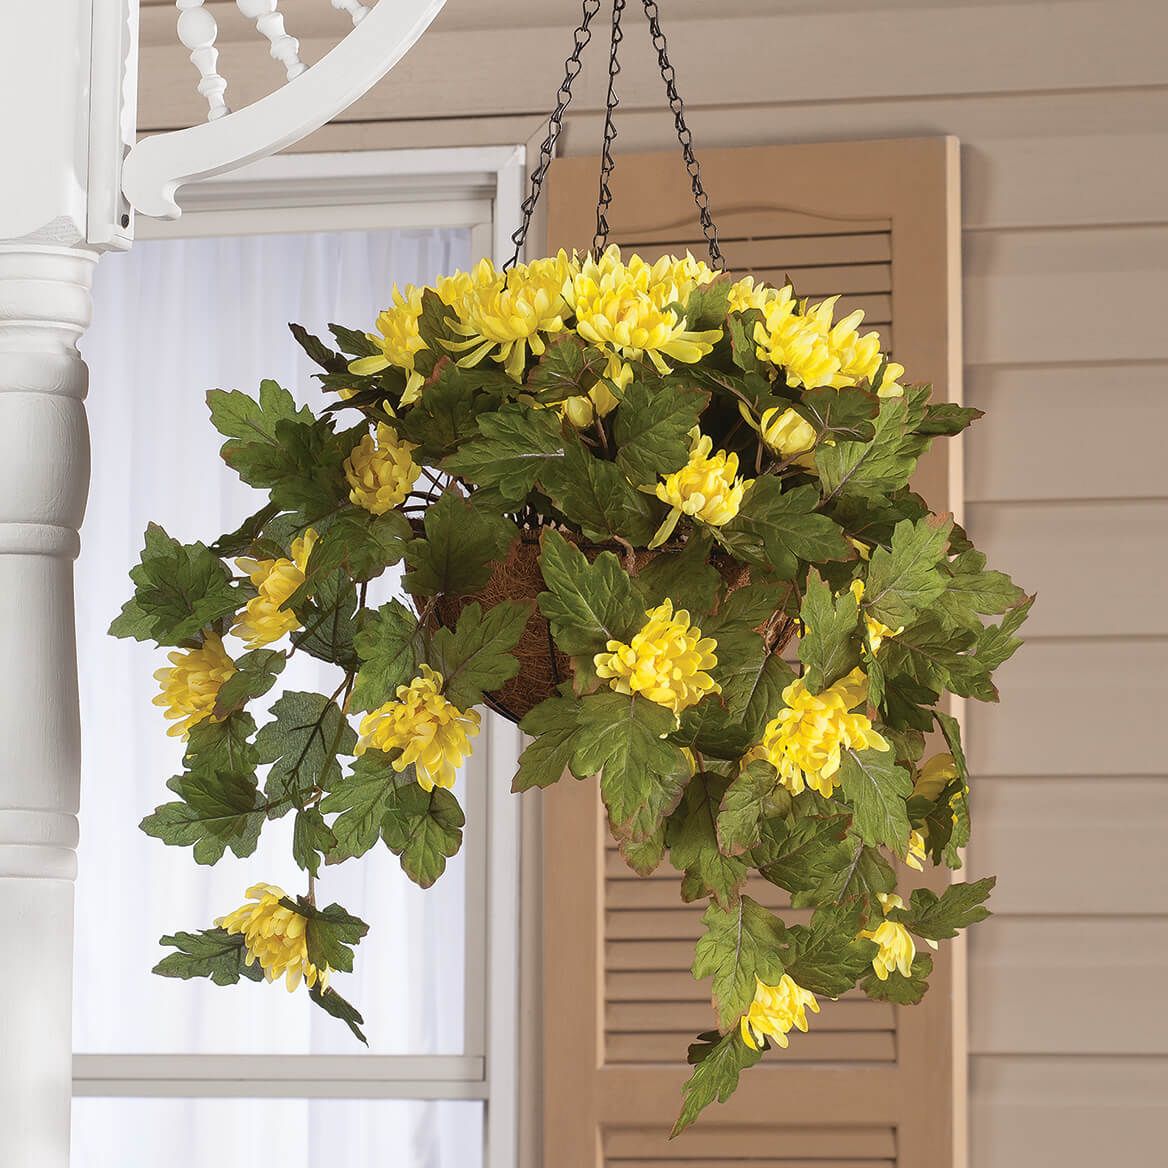 OakRidge Fully Assembled Artificial Mum Hanging Basket, Yellow, 10” Diameter with 18” Long Chain – Polyester/Plastic Flowers in Metal/Coco Fiber Liner Basket for Indoor/Outdoor Use - image 2 of 2